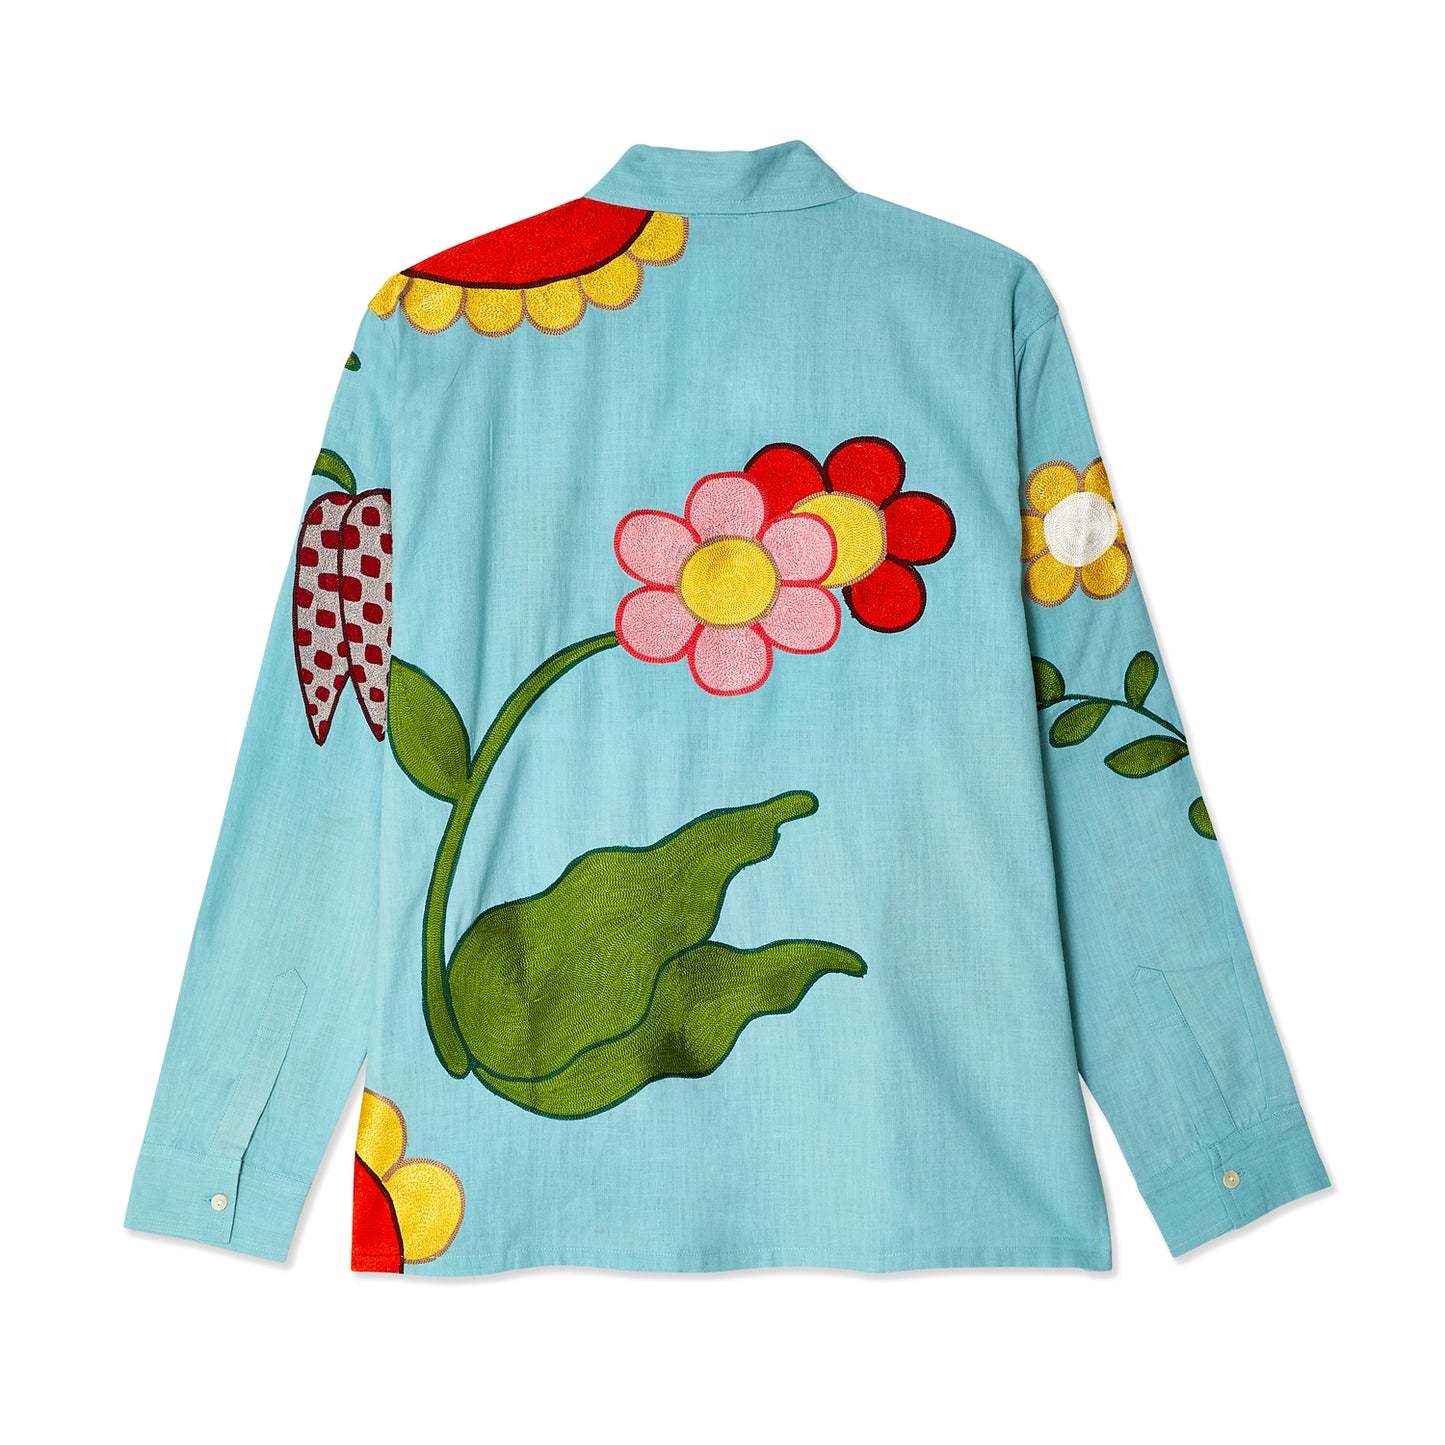 EMBROIDERED FLOWER SHIRT